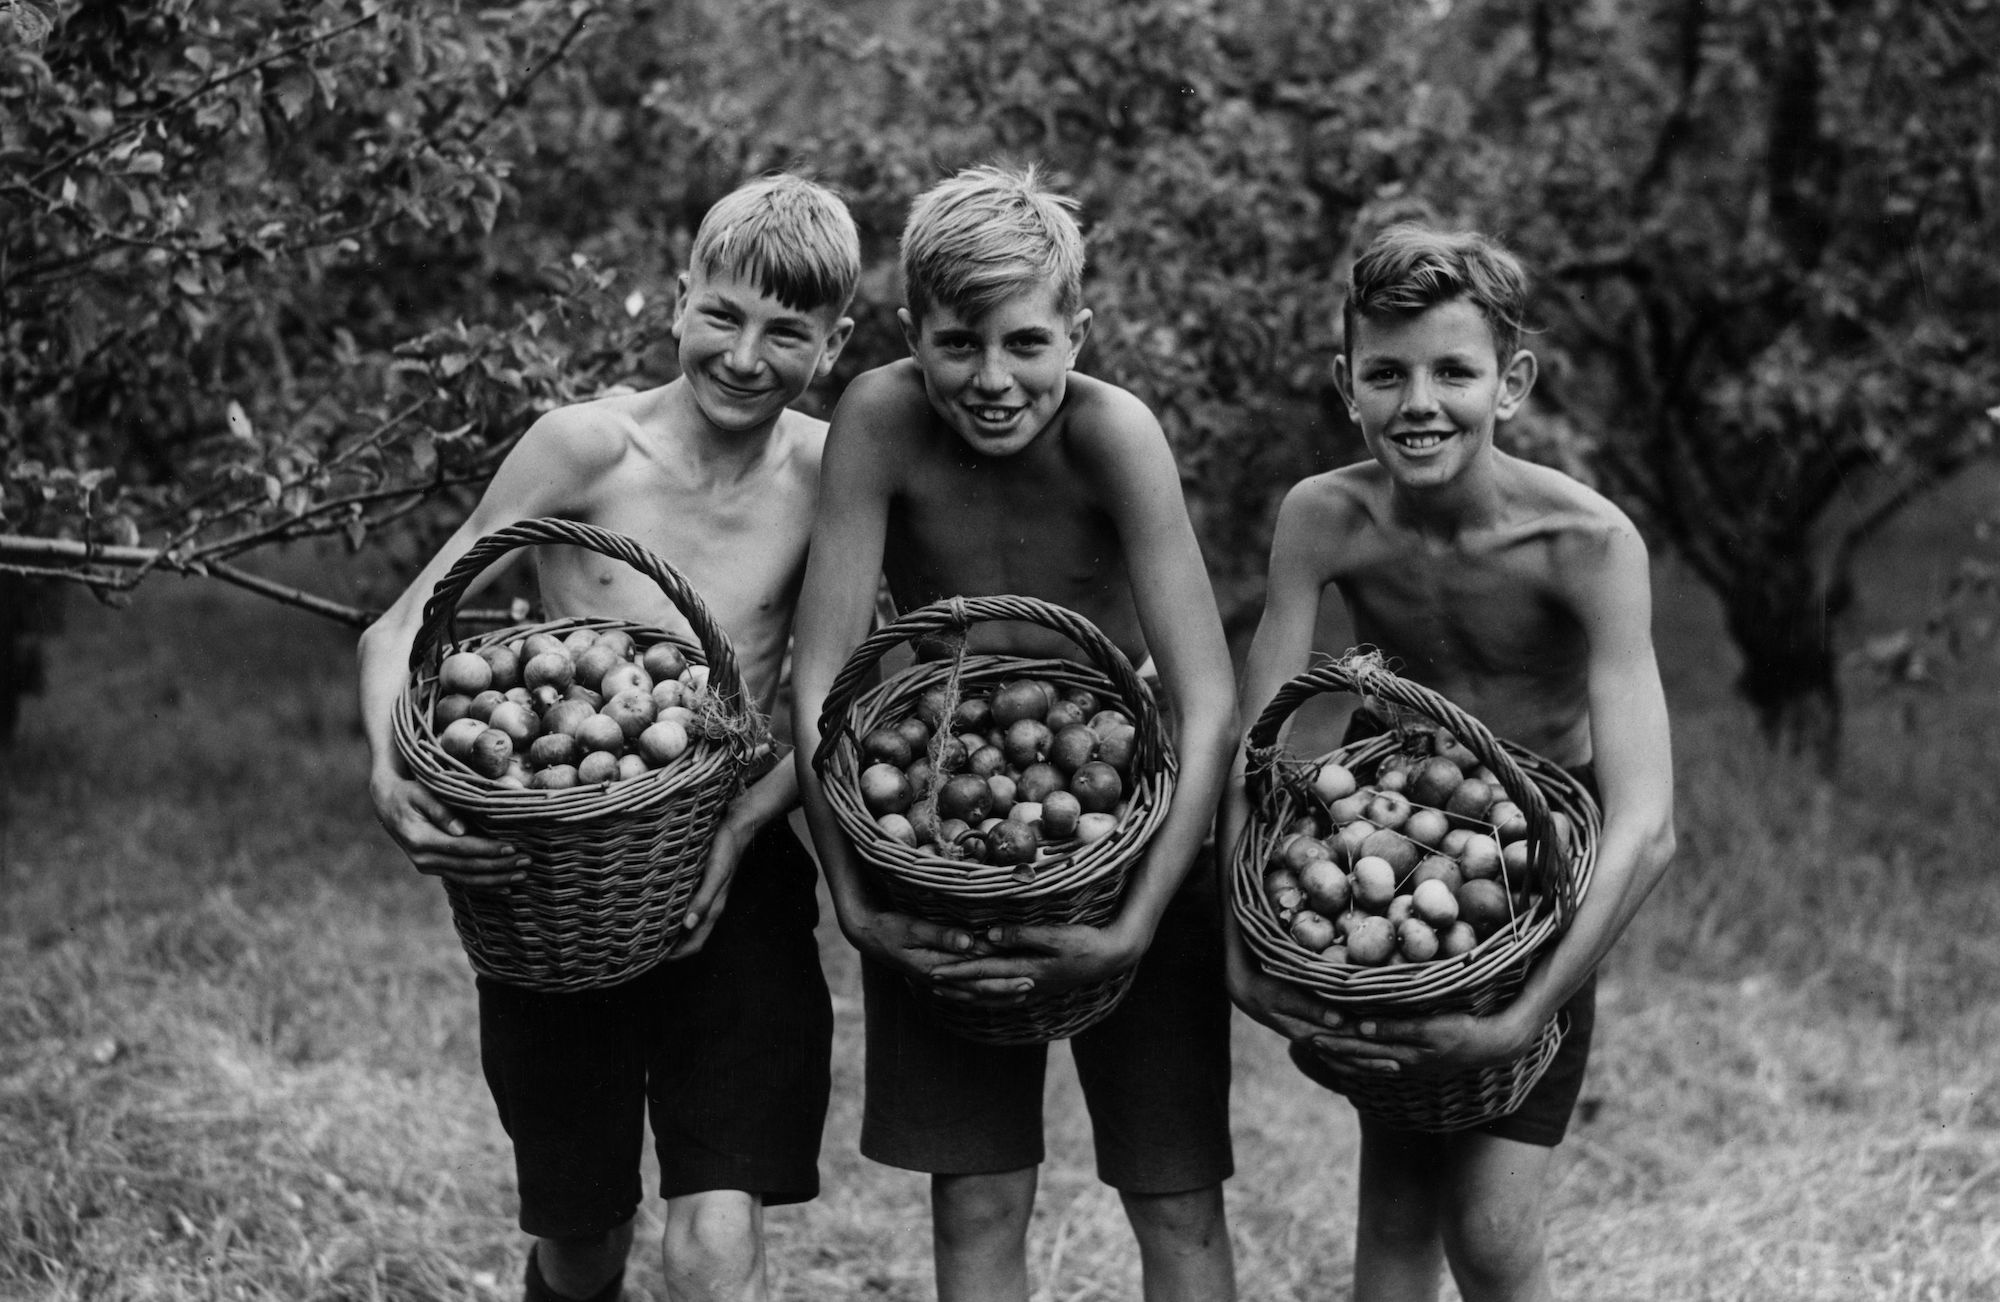 20th August 1943: Three schoolboys carrying baskets of apples after picking fruit during a stay at the Bishop of Rochesters Harvesting Camp at Cranbrook in Kent. (Photo by Reg Speller/Fox Photos/Getty Images)